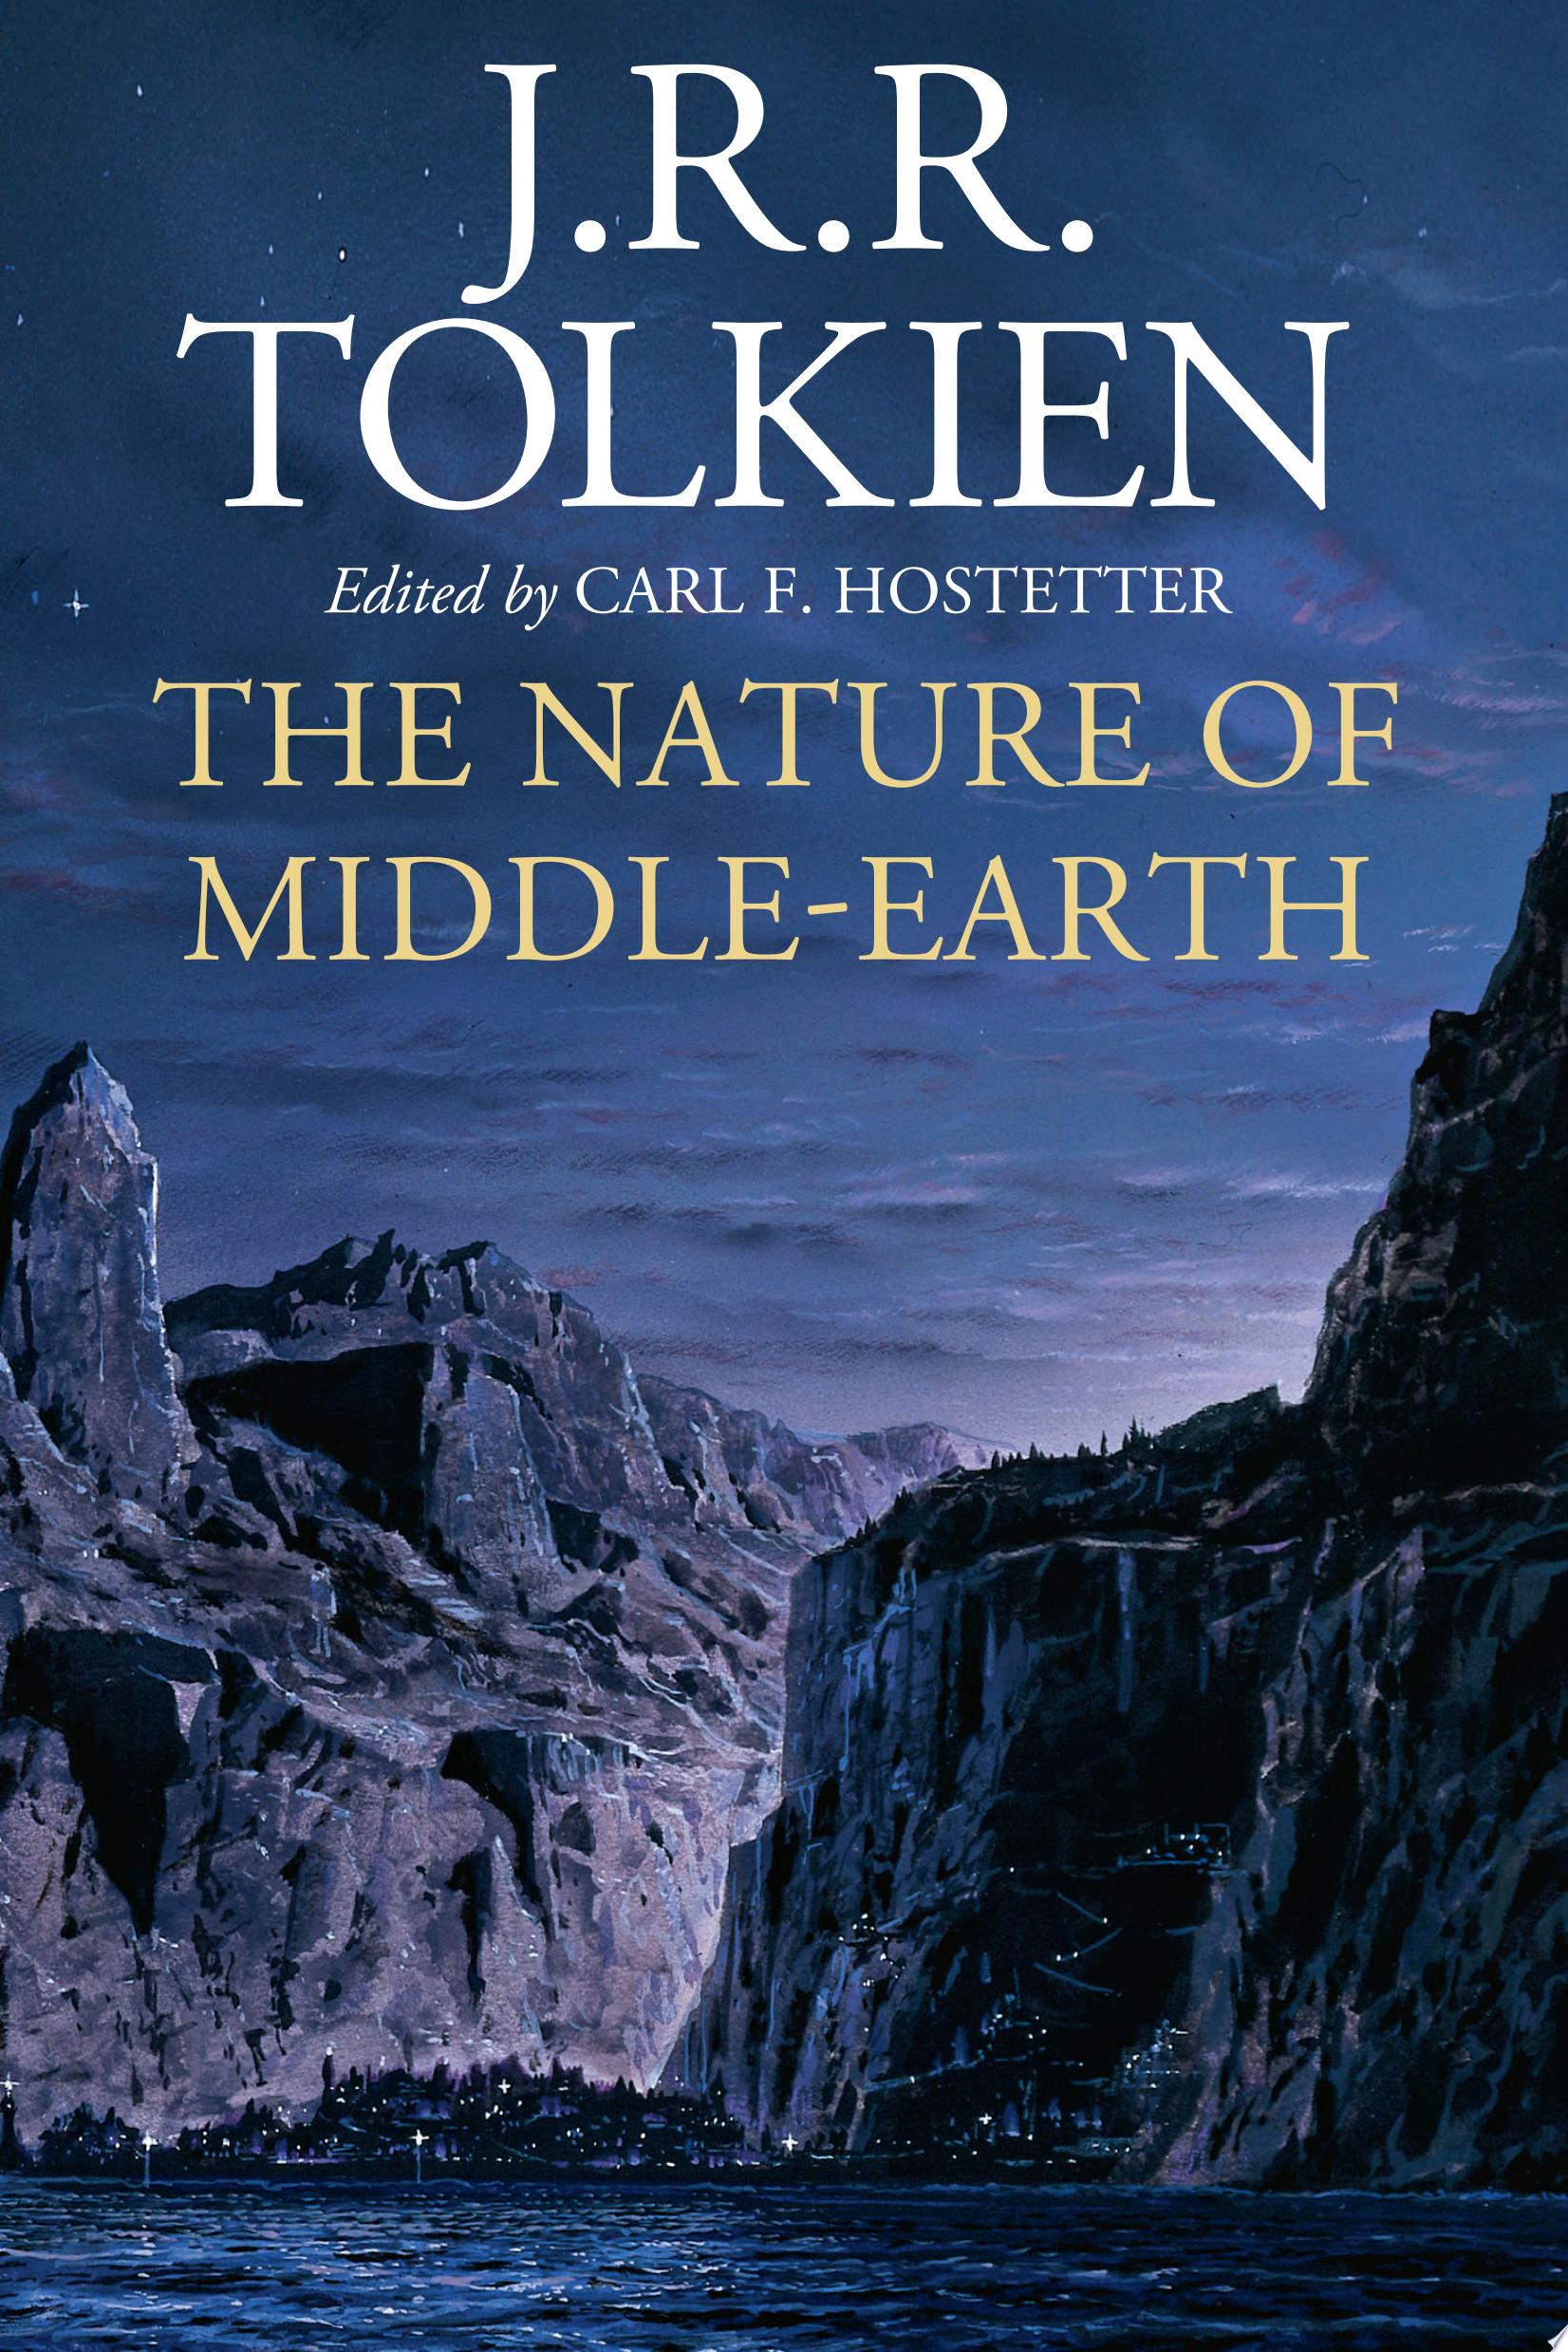 Image for "The Nature of Middle-Earth"